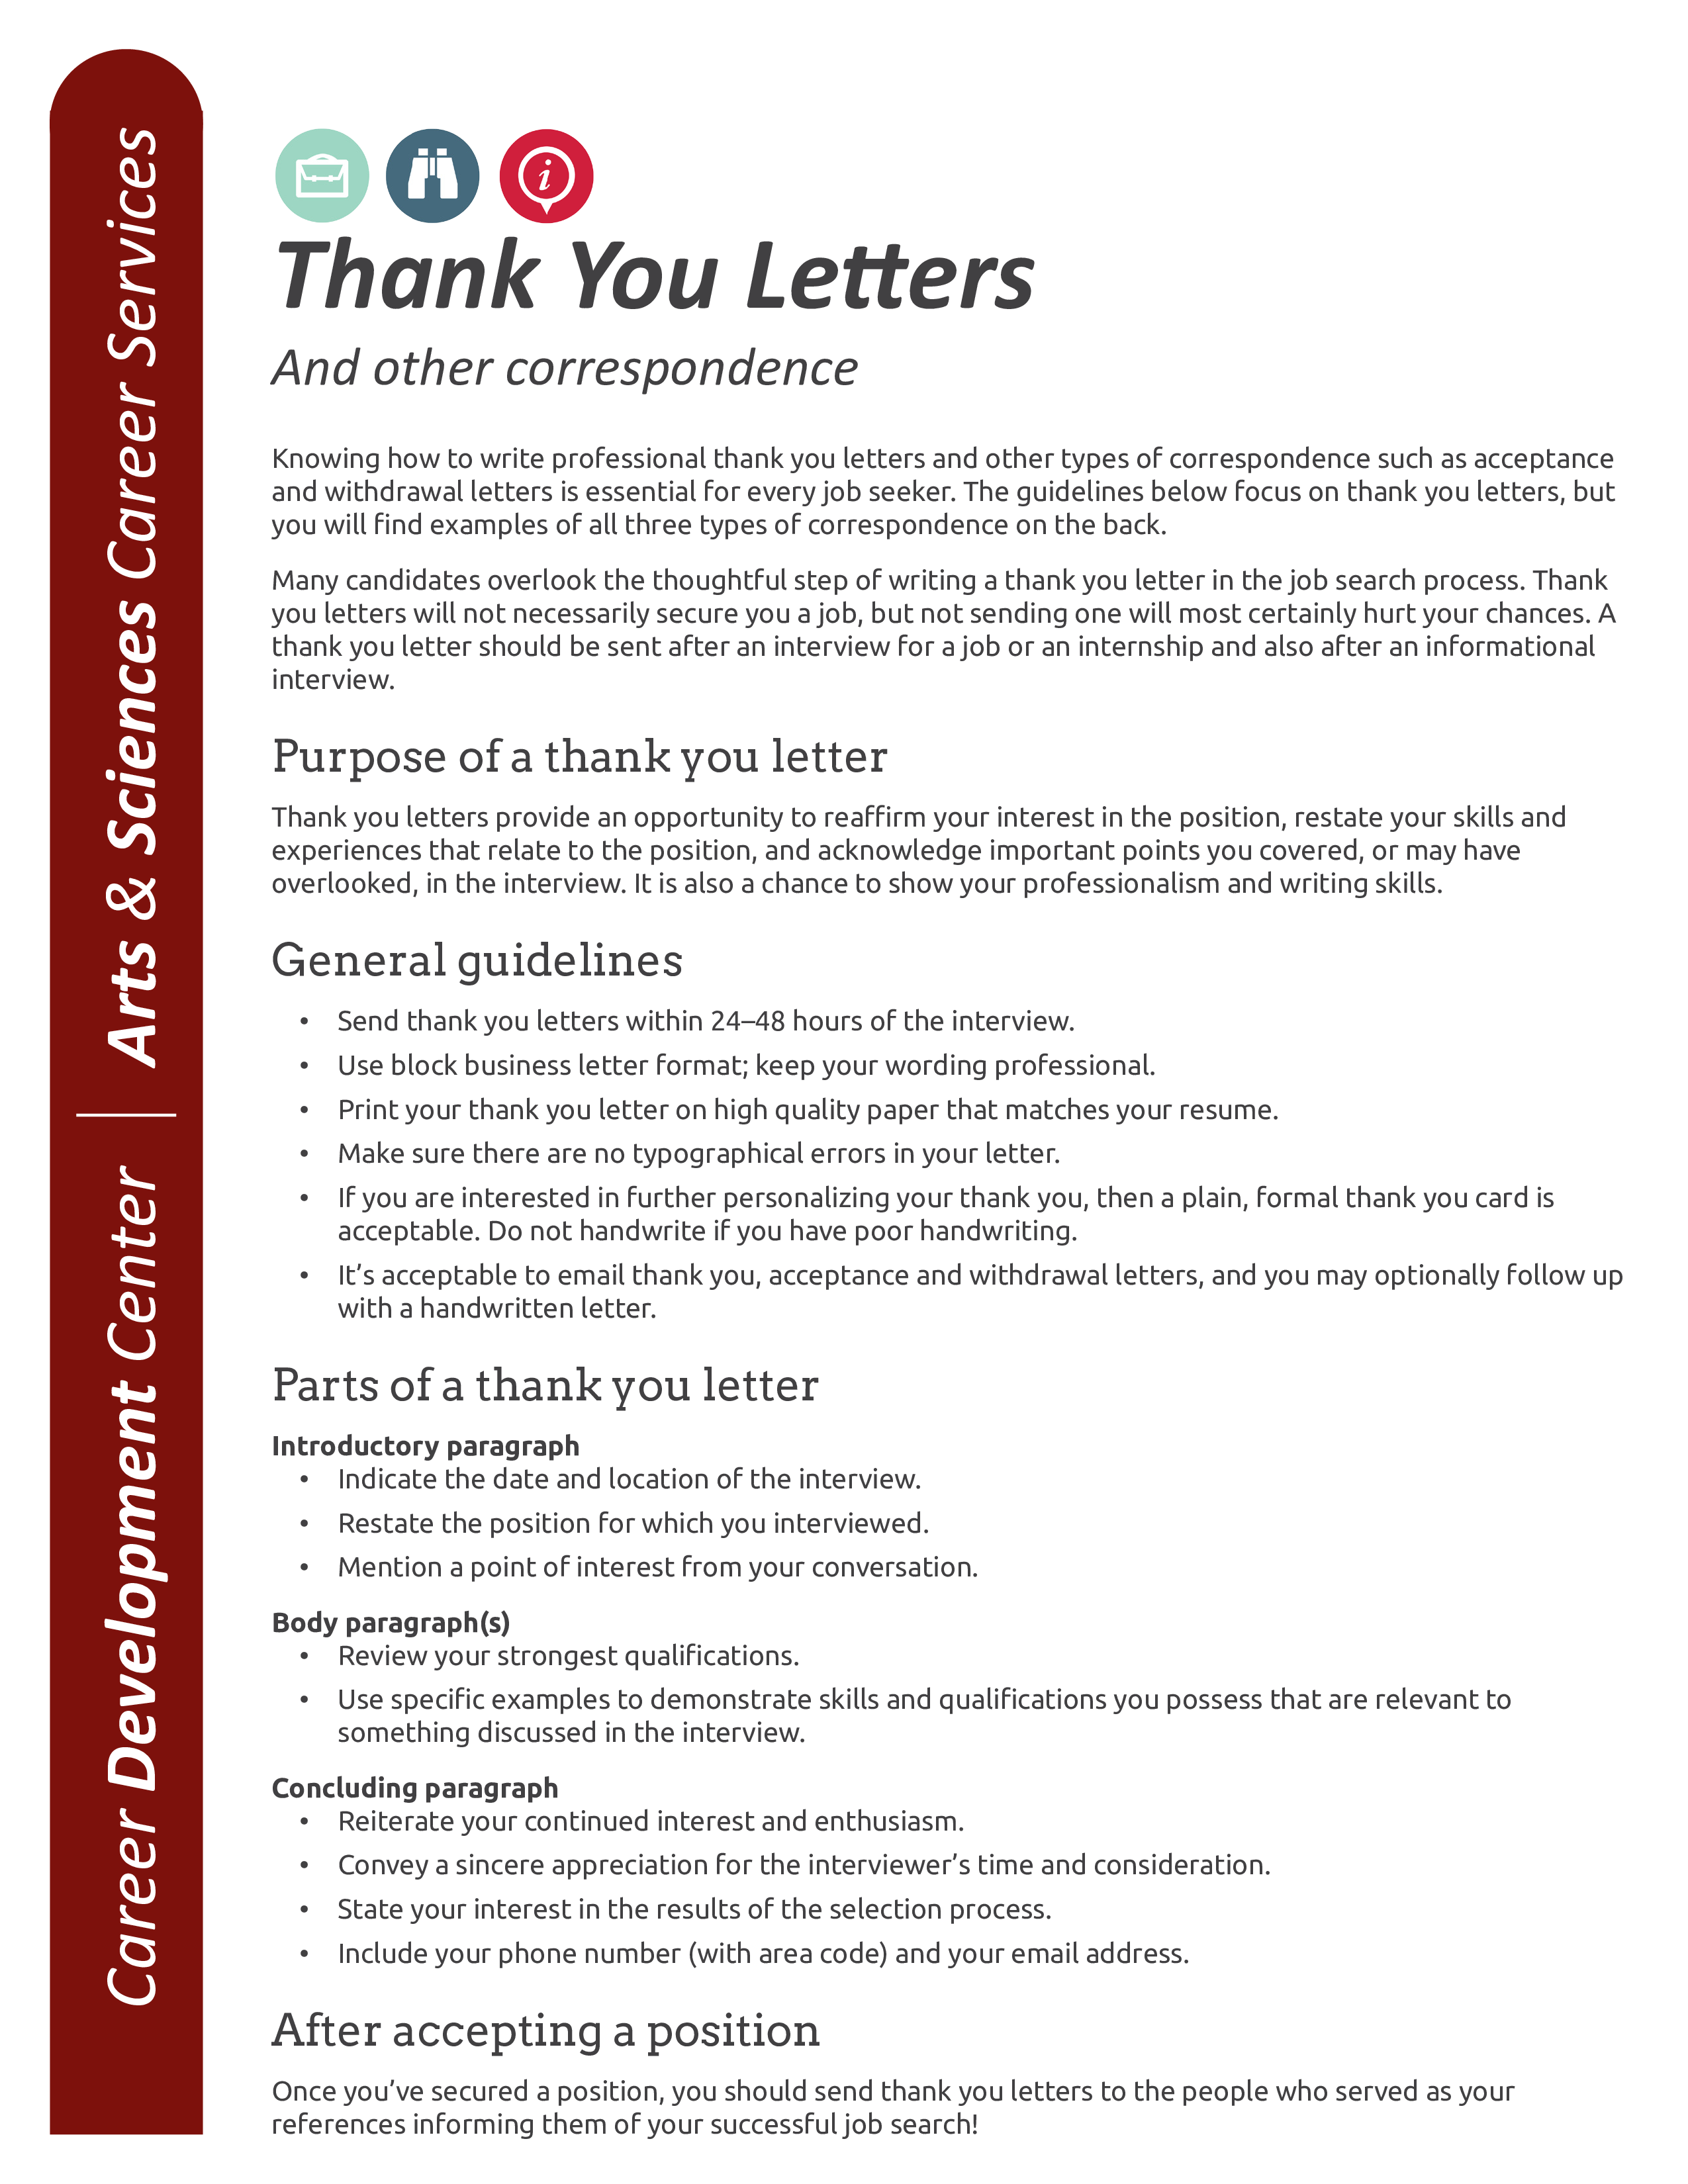 Free Formal Email Thank You Letter Templates At